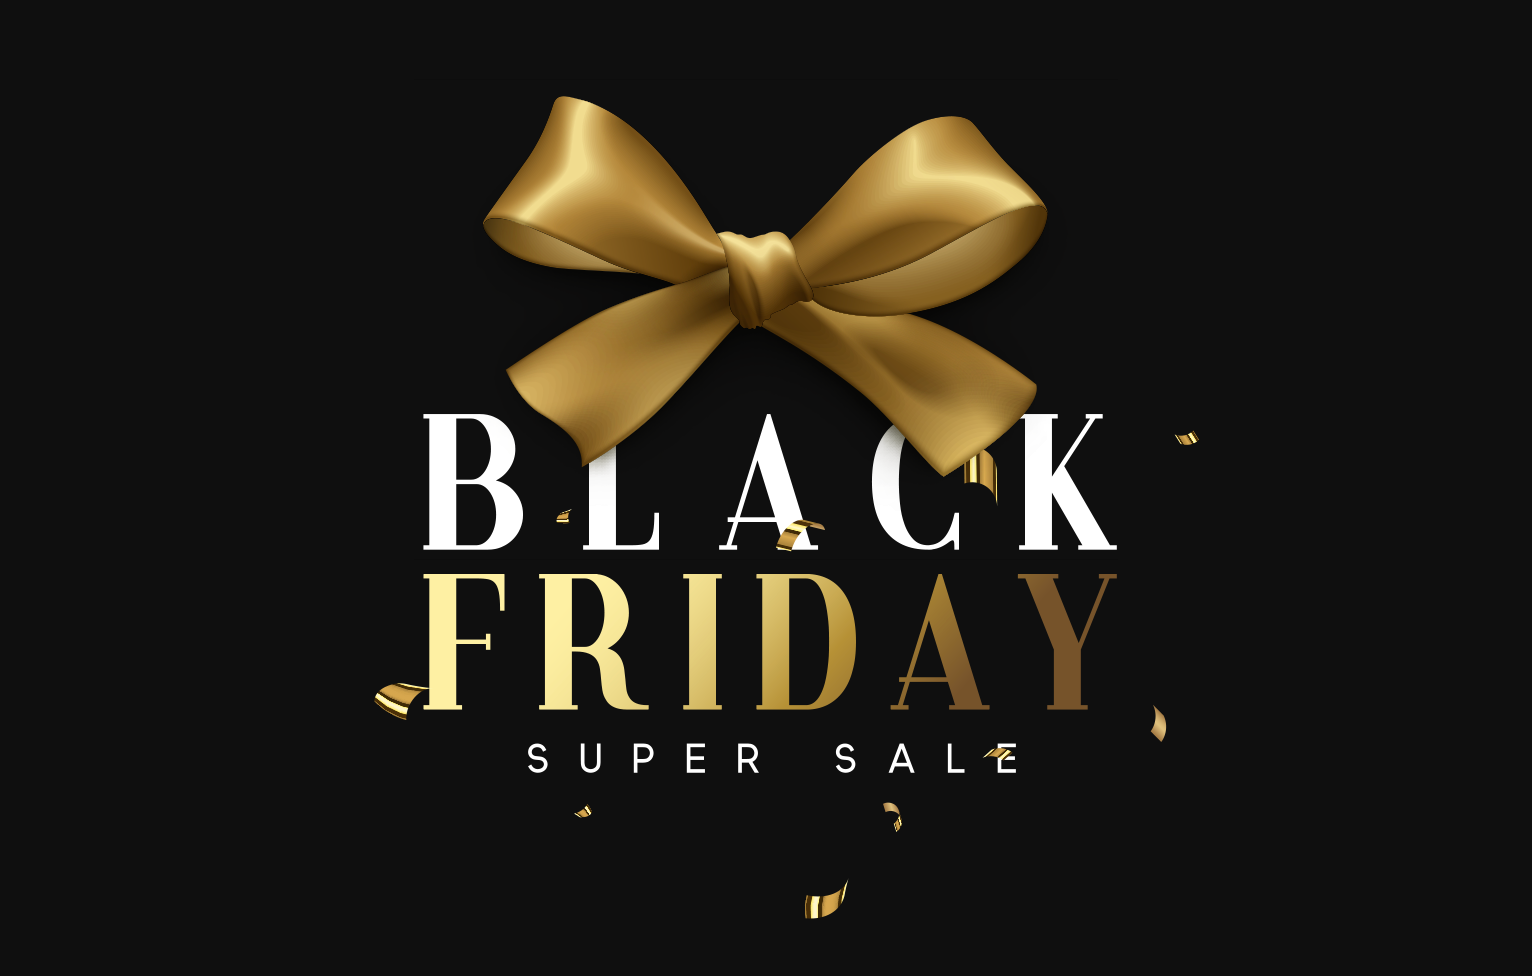 Black Friday Sale 2020 in India Best Deals, Date and How to Shop